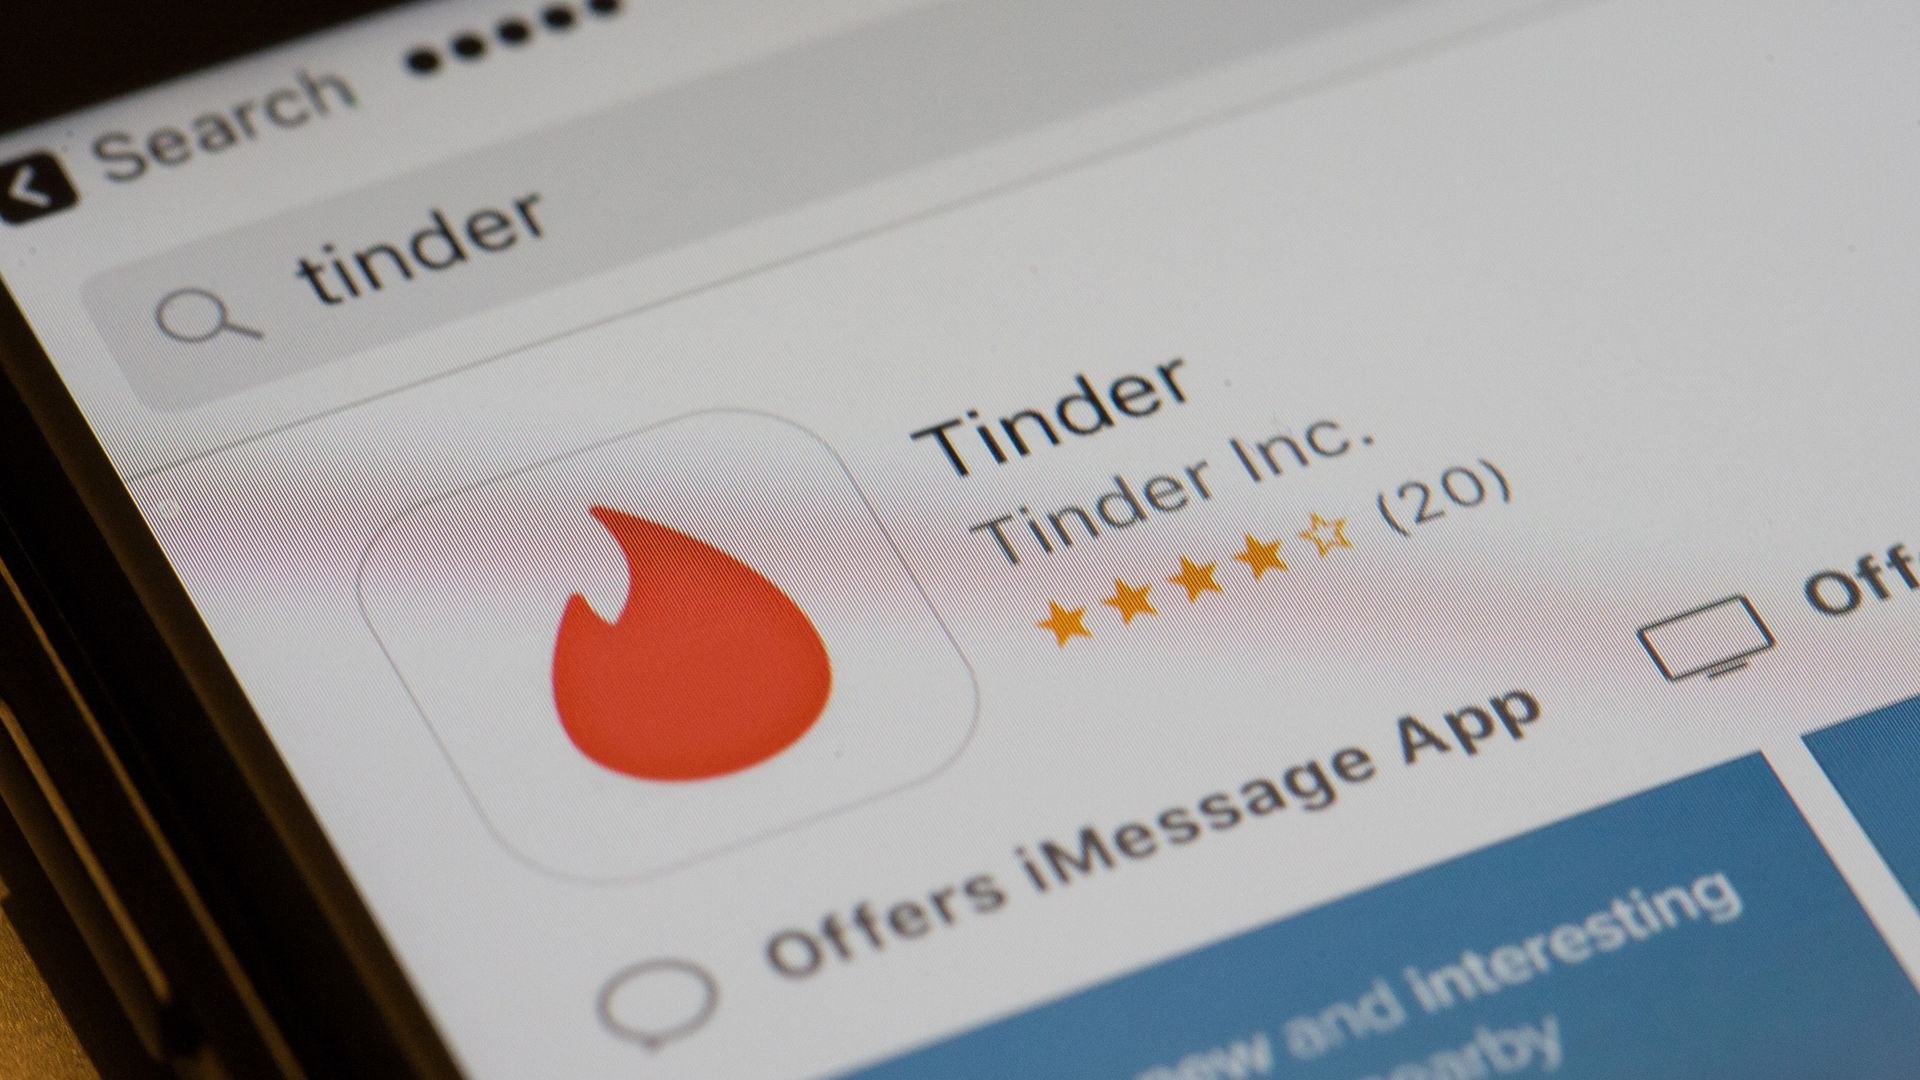 The Tinder app icon is shown in the app store